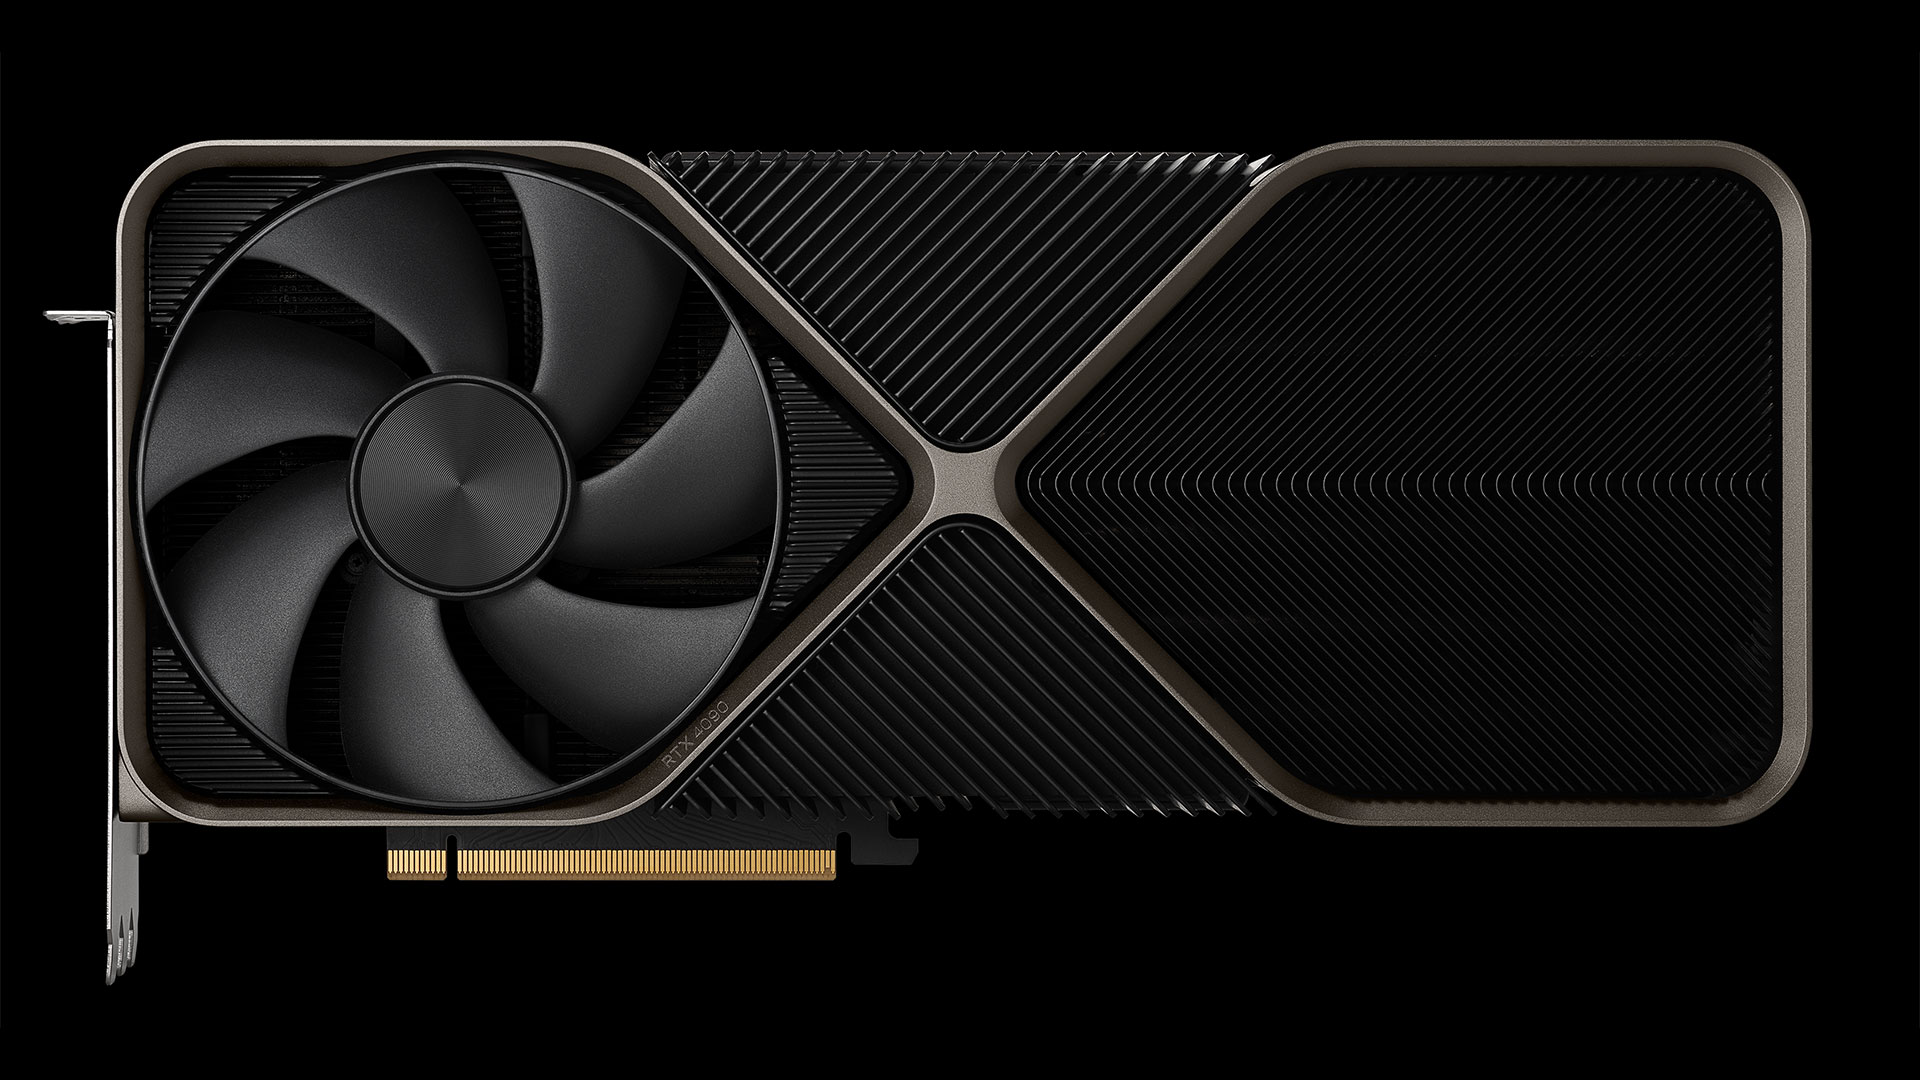 Nvidia debuts new high-end RTX 4090 GPU after previous generation